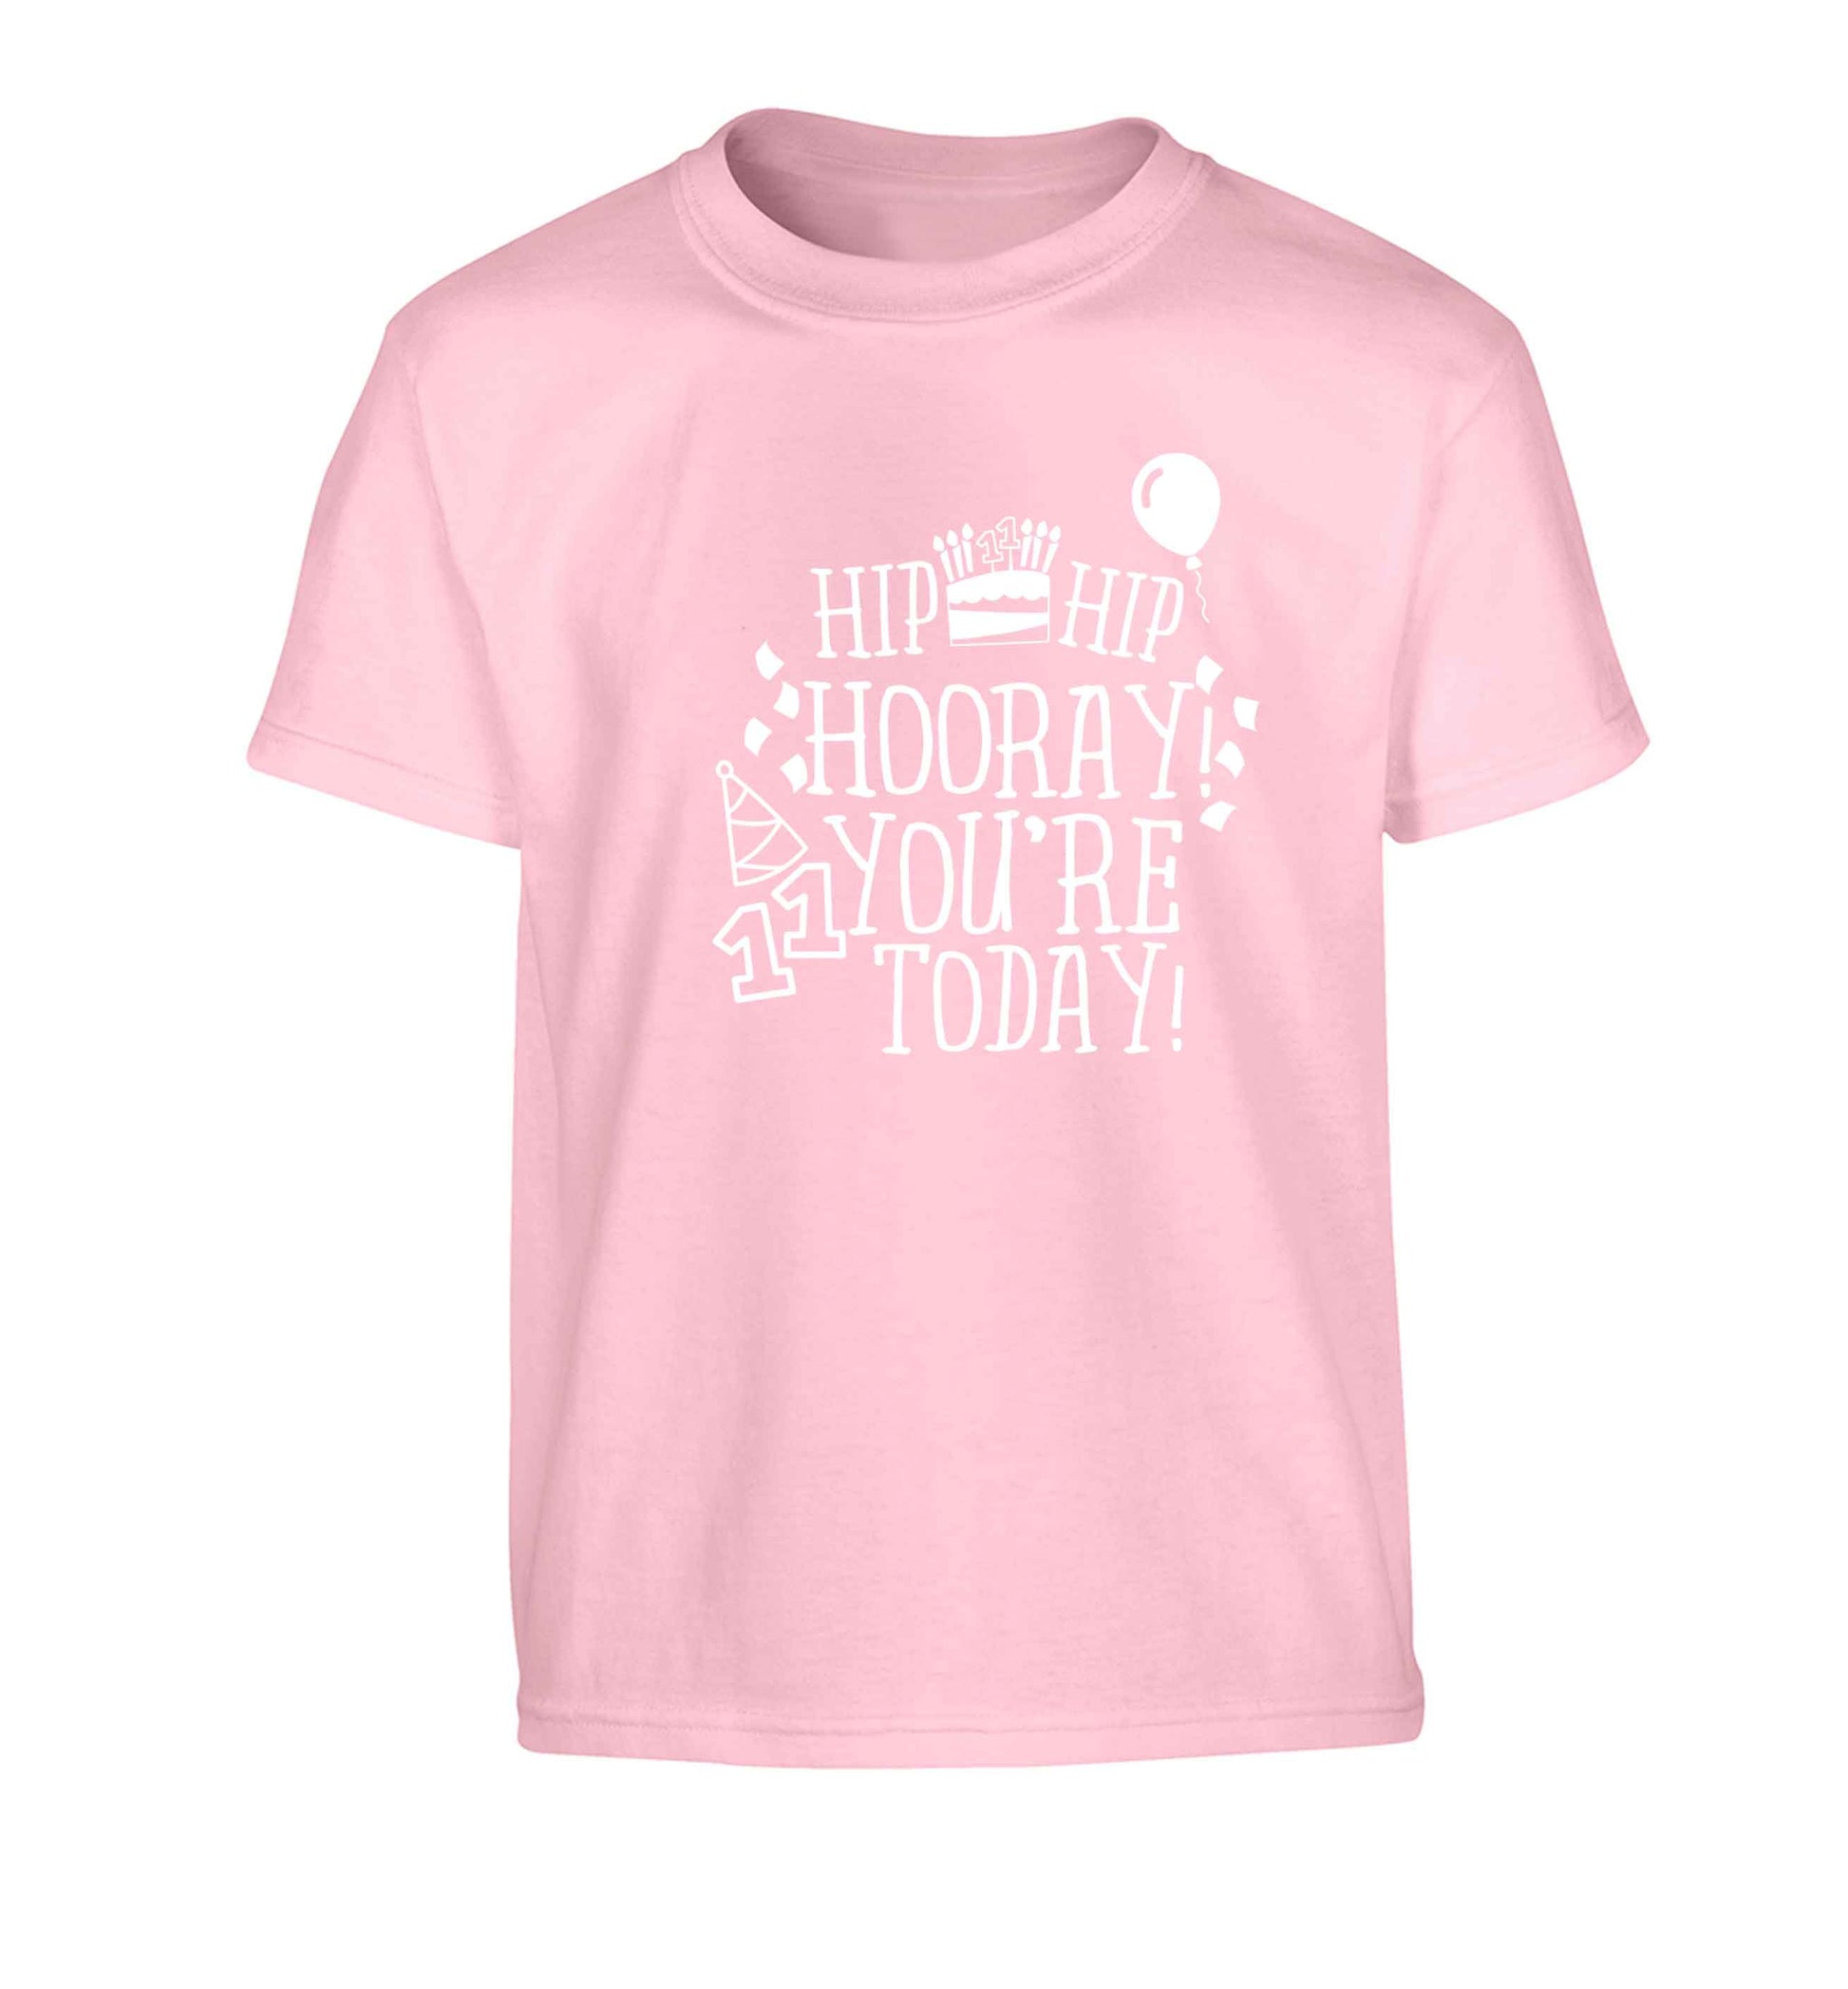 Hip hip hooray I you're eleven today! Children's light pink Tshirt 12-13 Years